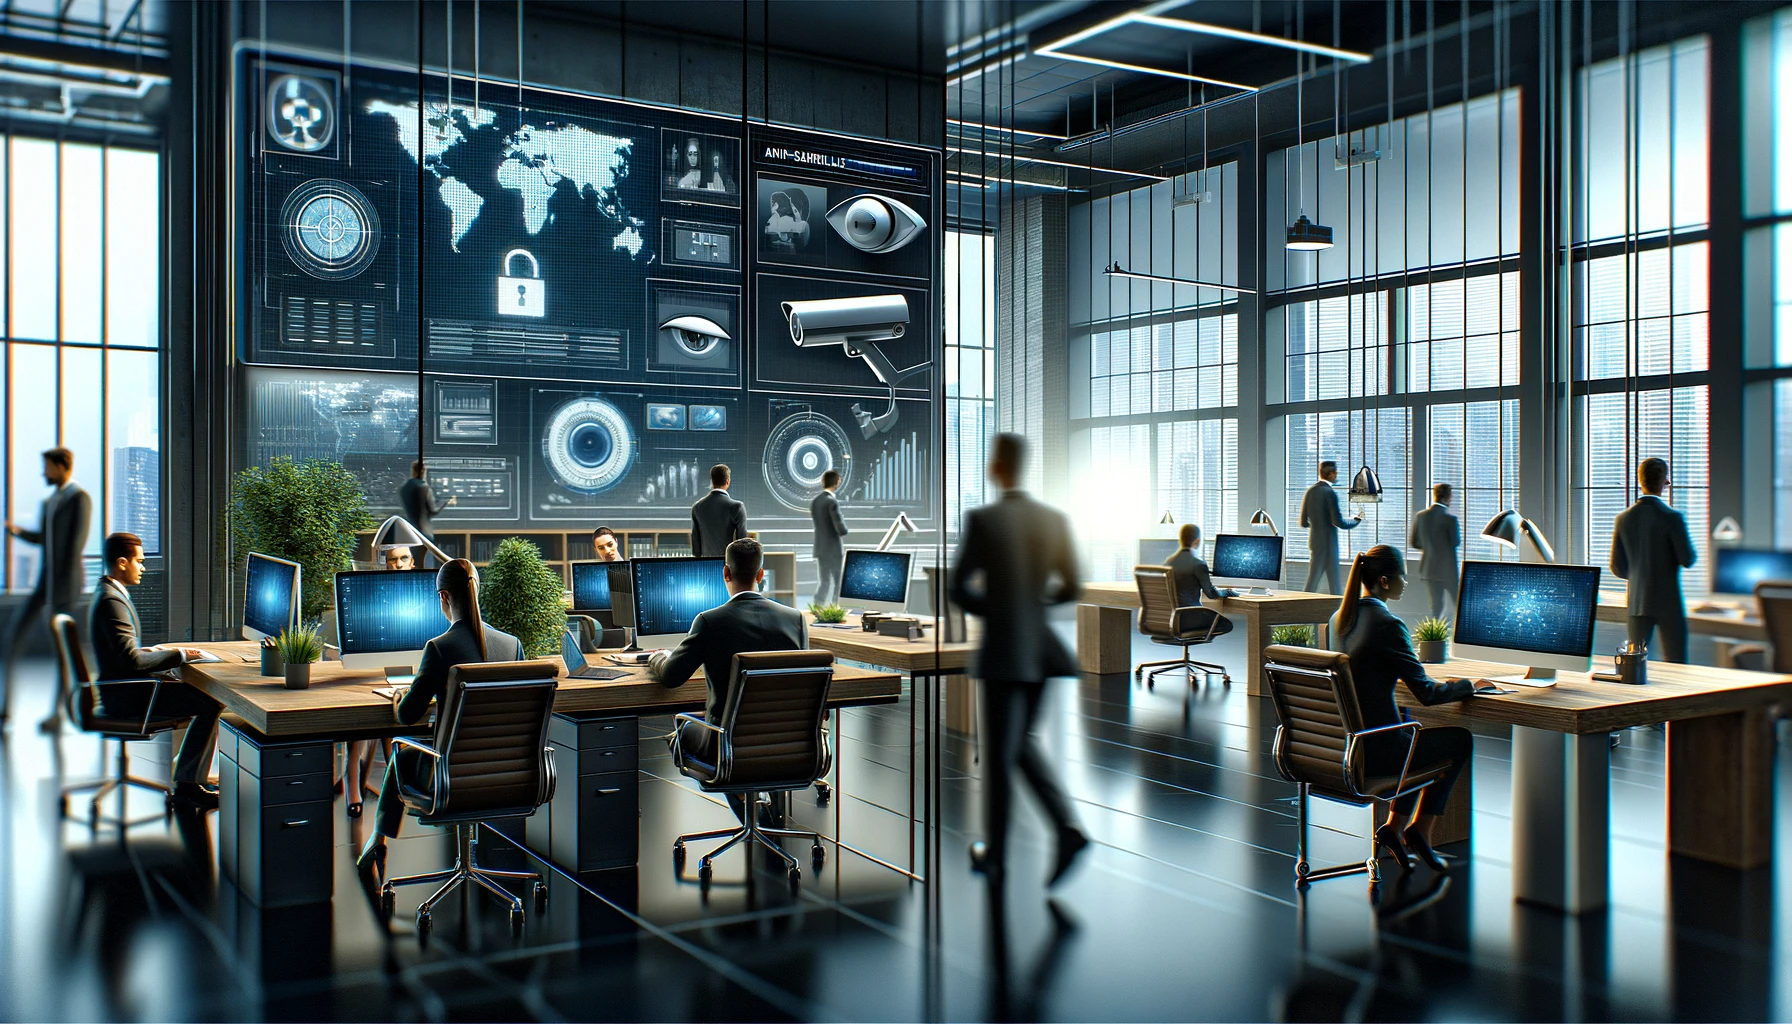 A busy office, with lots of private investigators working on computers. There is a large projection in front of them showing surveillance related images. Private Investigator